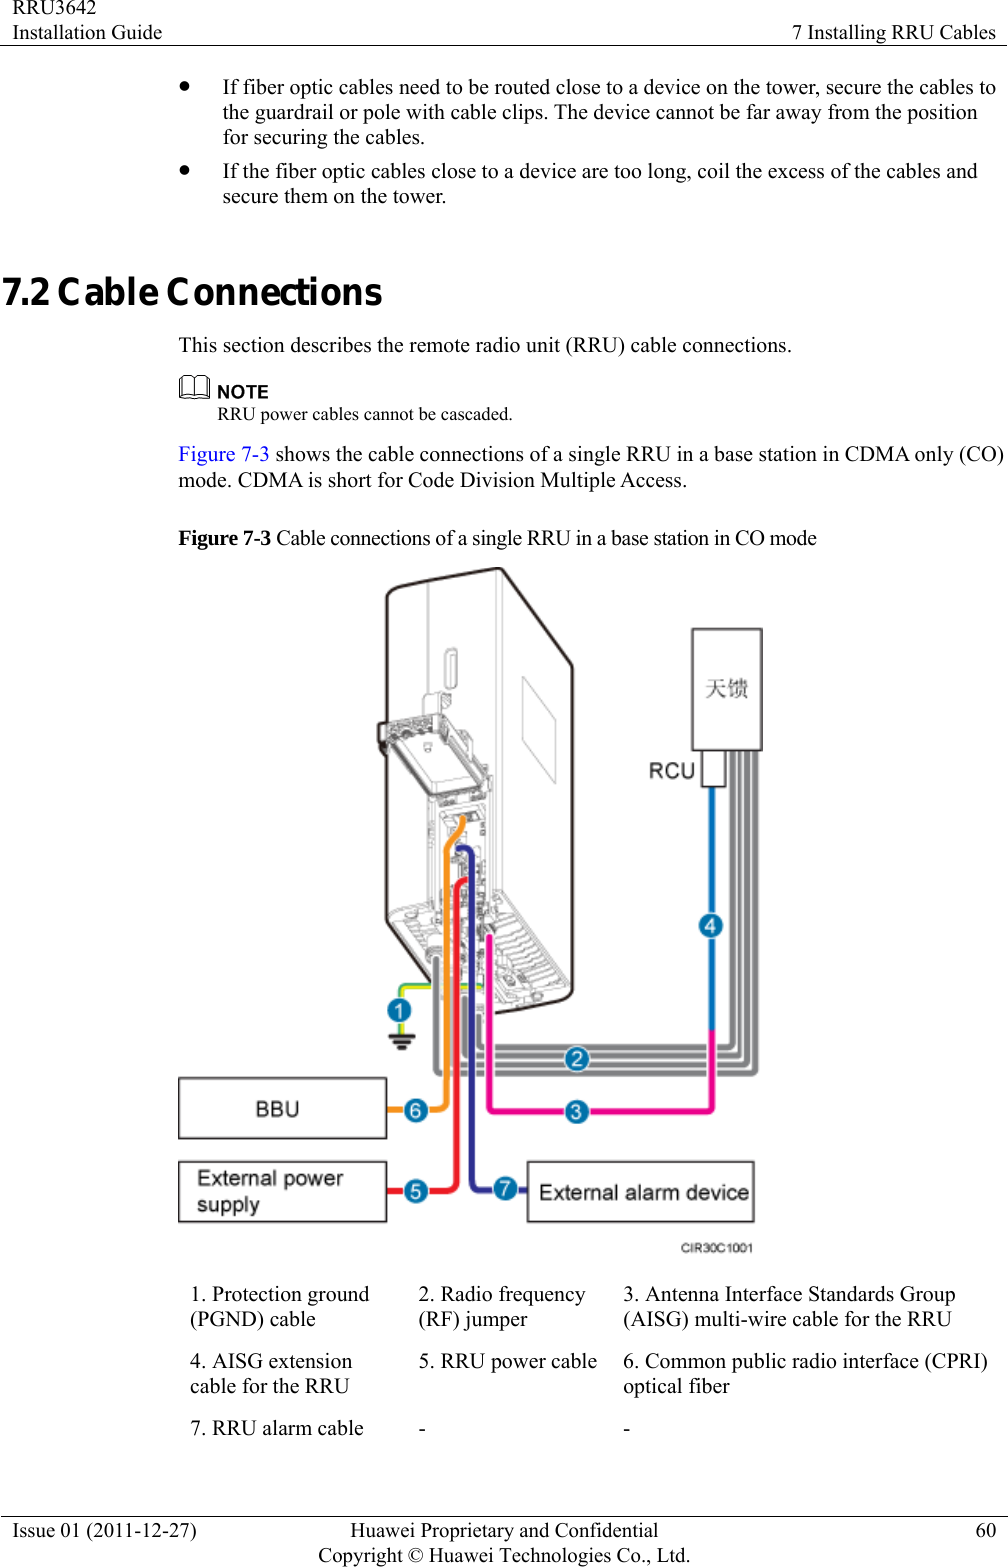 RRU3642 Installation Guide  7 Installing RRU Cables Issue 01 (2011-12-27)  Huawei Proprietary and Confidential         Copyright © Huawei Technologies Co., Ltd.60 z If fiber optic cables need to be routed close to a device on the tower, secure the cables to the guardrail or pole with cable clips. The device cannot be far away from the position for securing the cables. z If the fiber optic cables close to a device are too long, coil the excess of the cables and secure them on the tower. 7.2 Cable Connections This section describes the remote radio unit (RRU) cable connections.    RRU power cables cannot be cascaded.   Figure 7-3 shows the cable connections of a single RRU in a base station in CDMA only (CO) mode. CDMA is short for Code Division Multiple Access.   Figure 7-3 Cable connections of a single RRU in a base station in CO mode  1. Protection ground (PGND) cable 2. Radio frequency (RF) jumper 3. Antenna Interface Standards Group (AISG) multi-wire cable for the RRU 4. AISG extension cable for the RRU 5. RRU power cable 6. Common public radio interface (CPRI) optical fiber 7. RRU alarm cable  -  - 